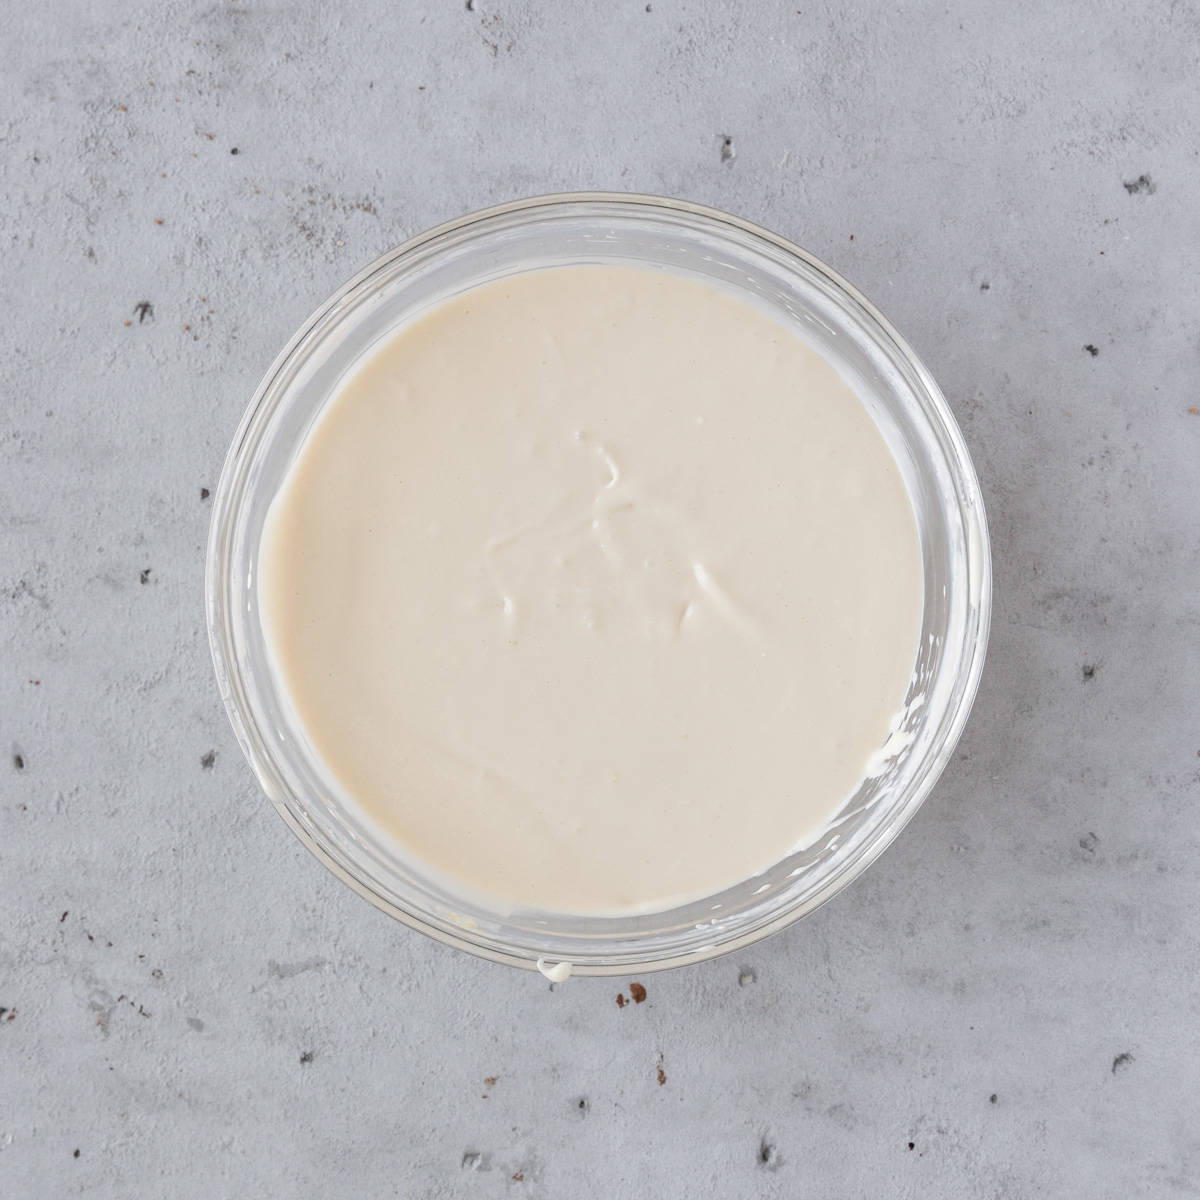 the vanilla cheesecake batter in a glass bowl on grey background.